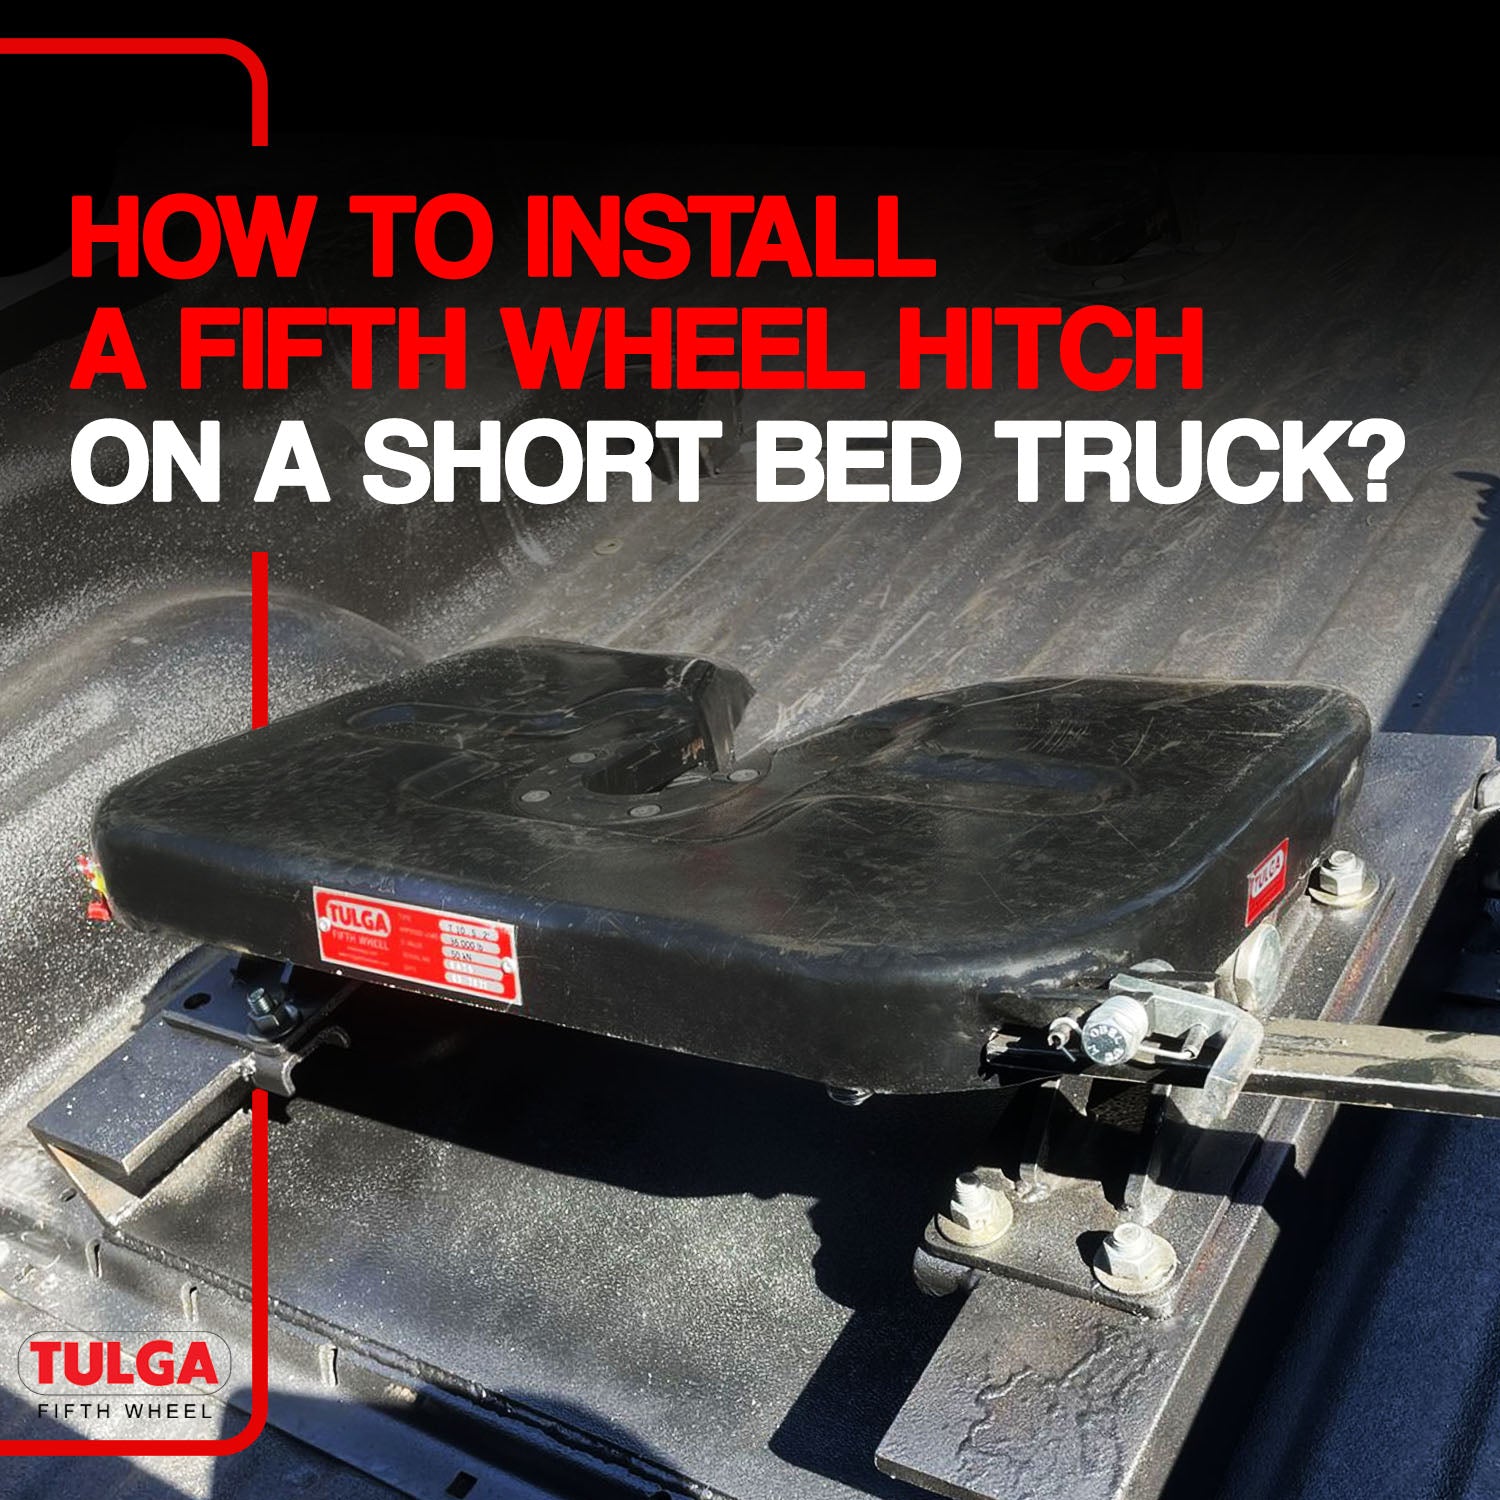 How to install a fifth wheel hitch on a short bed truck?